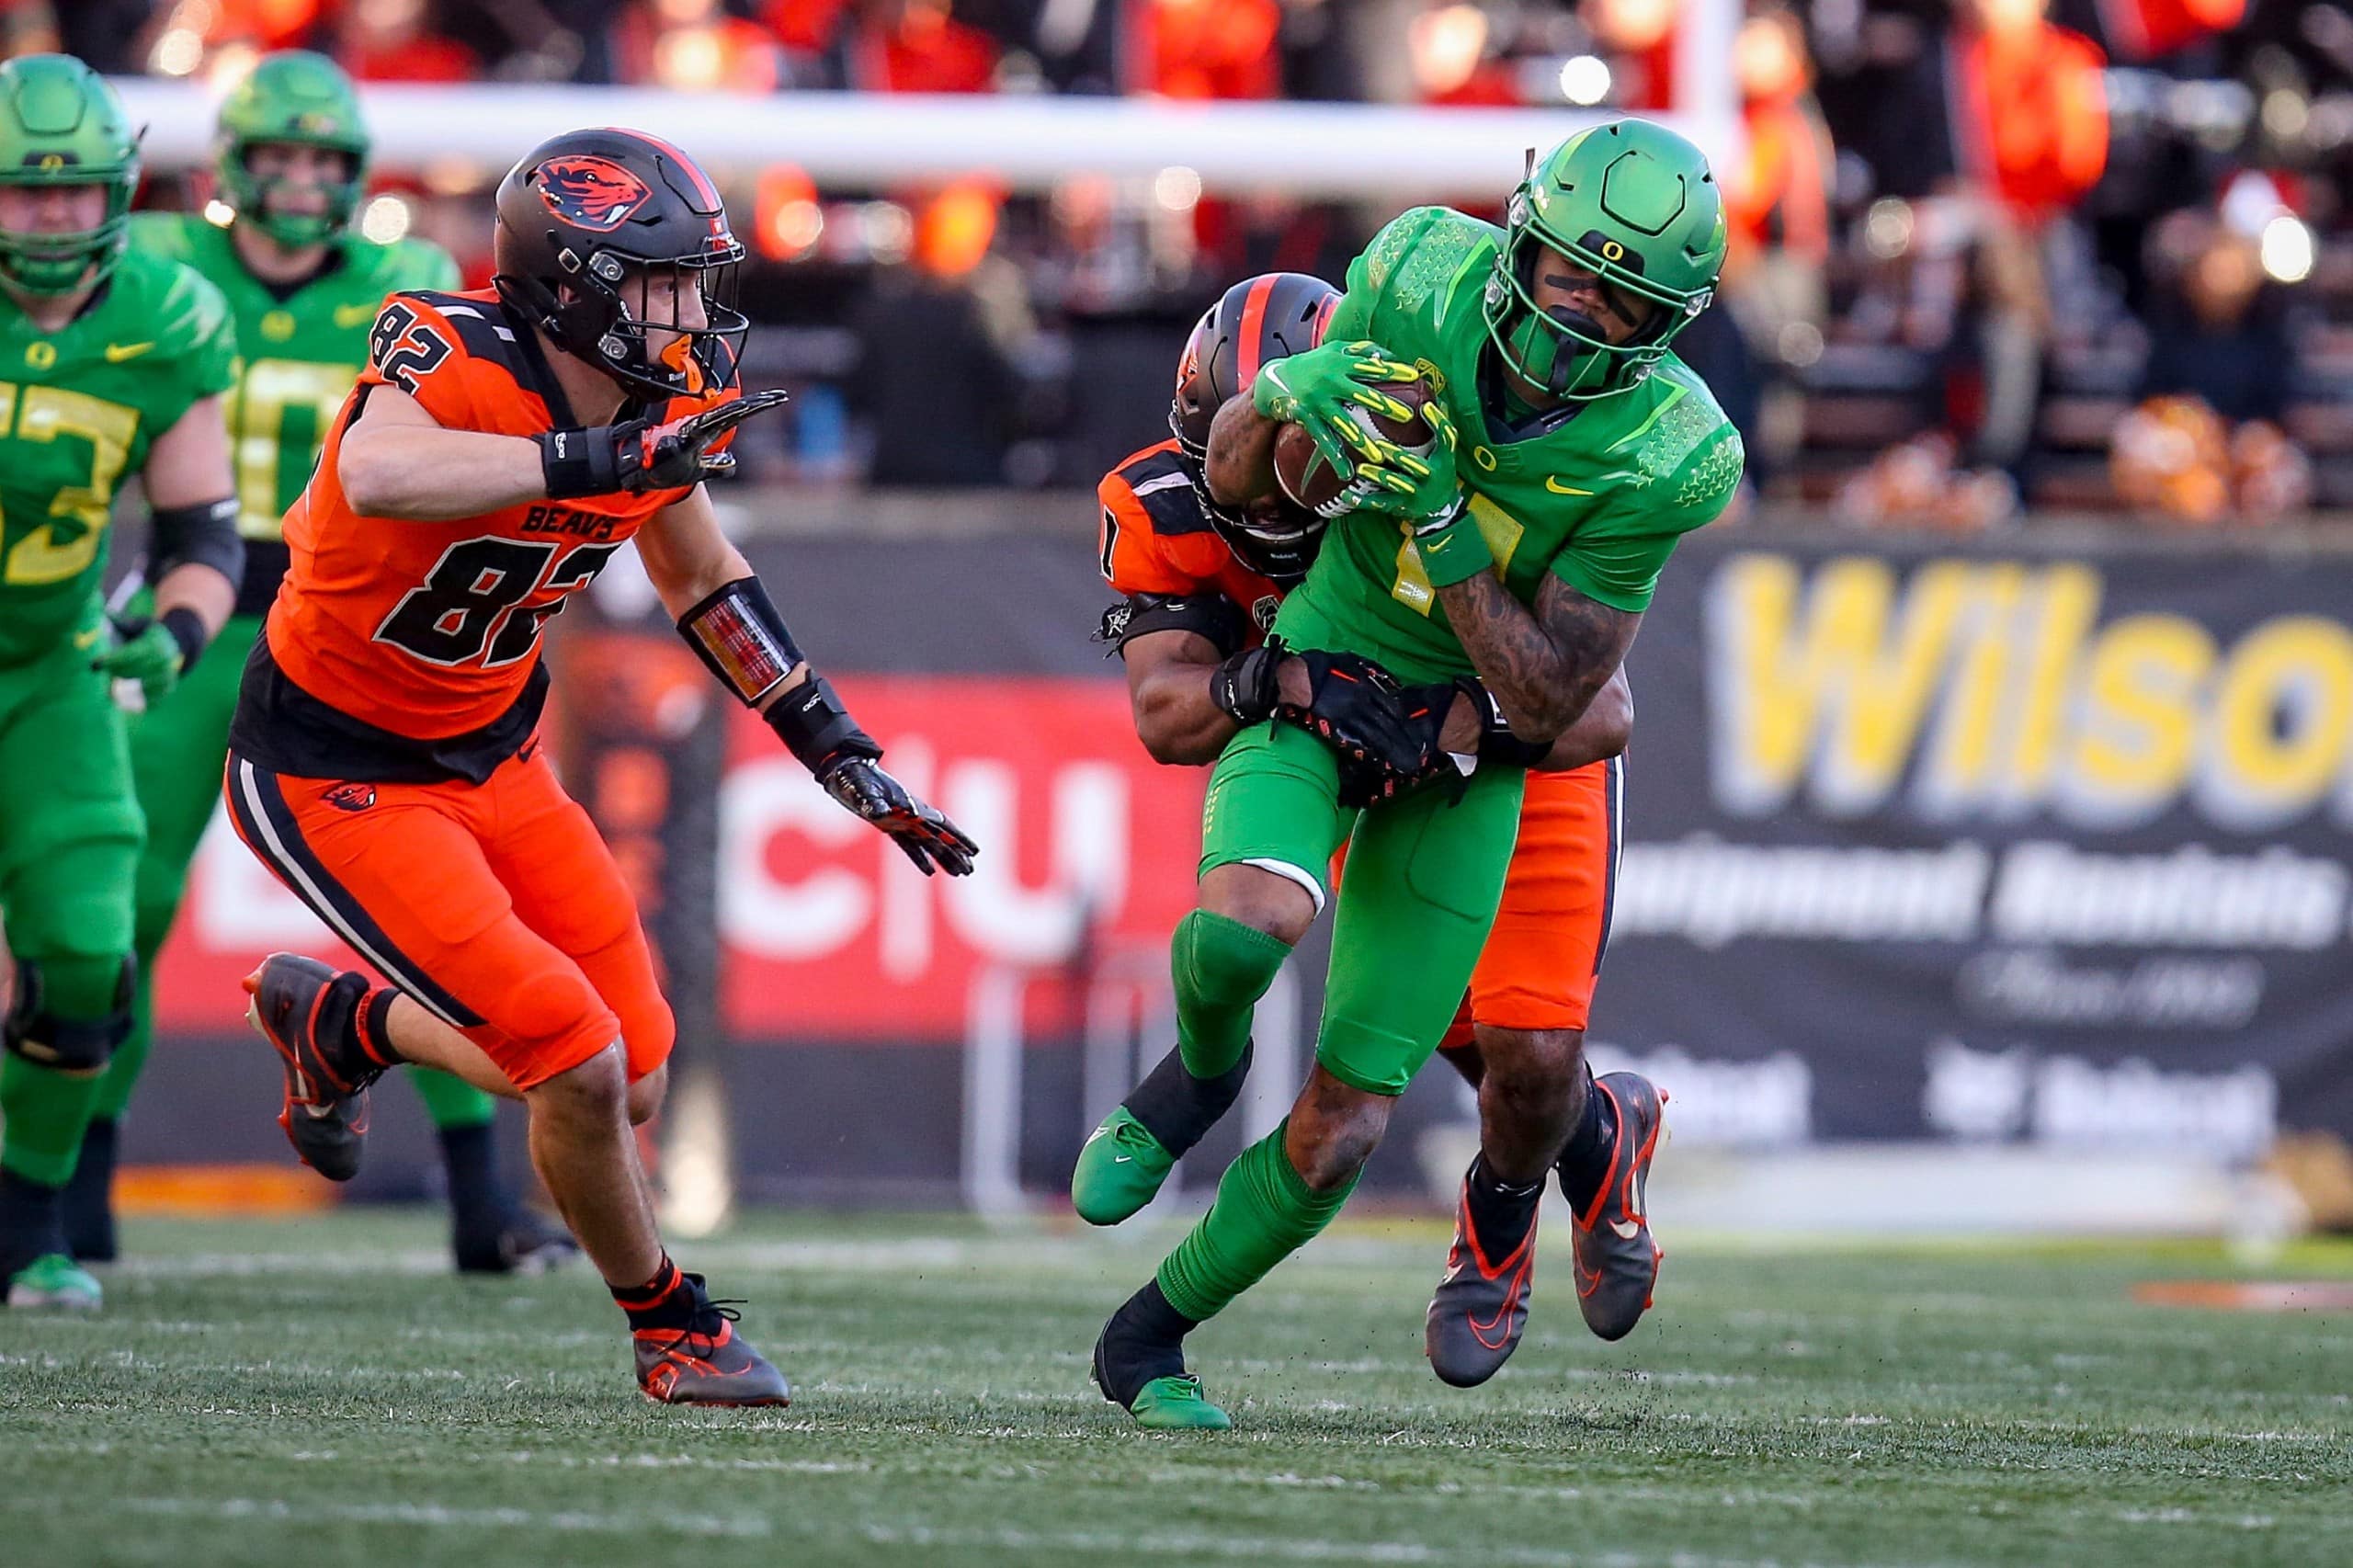 Oregon player is tackled by Oregon State player